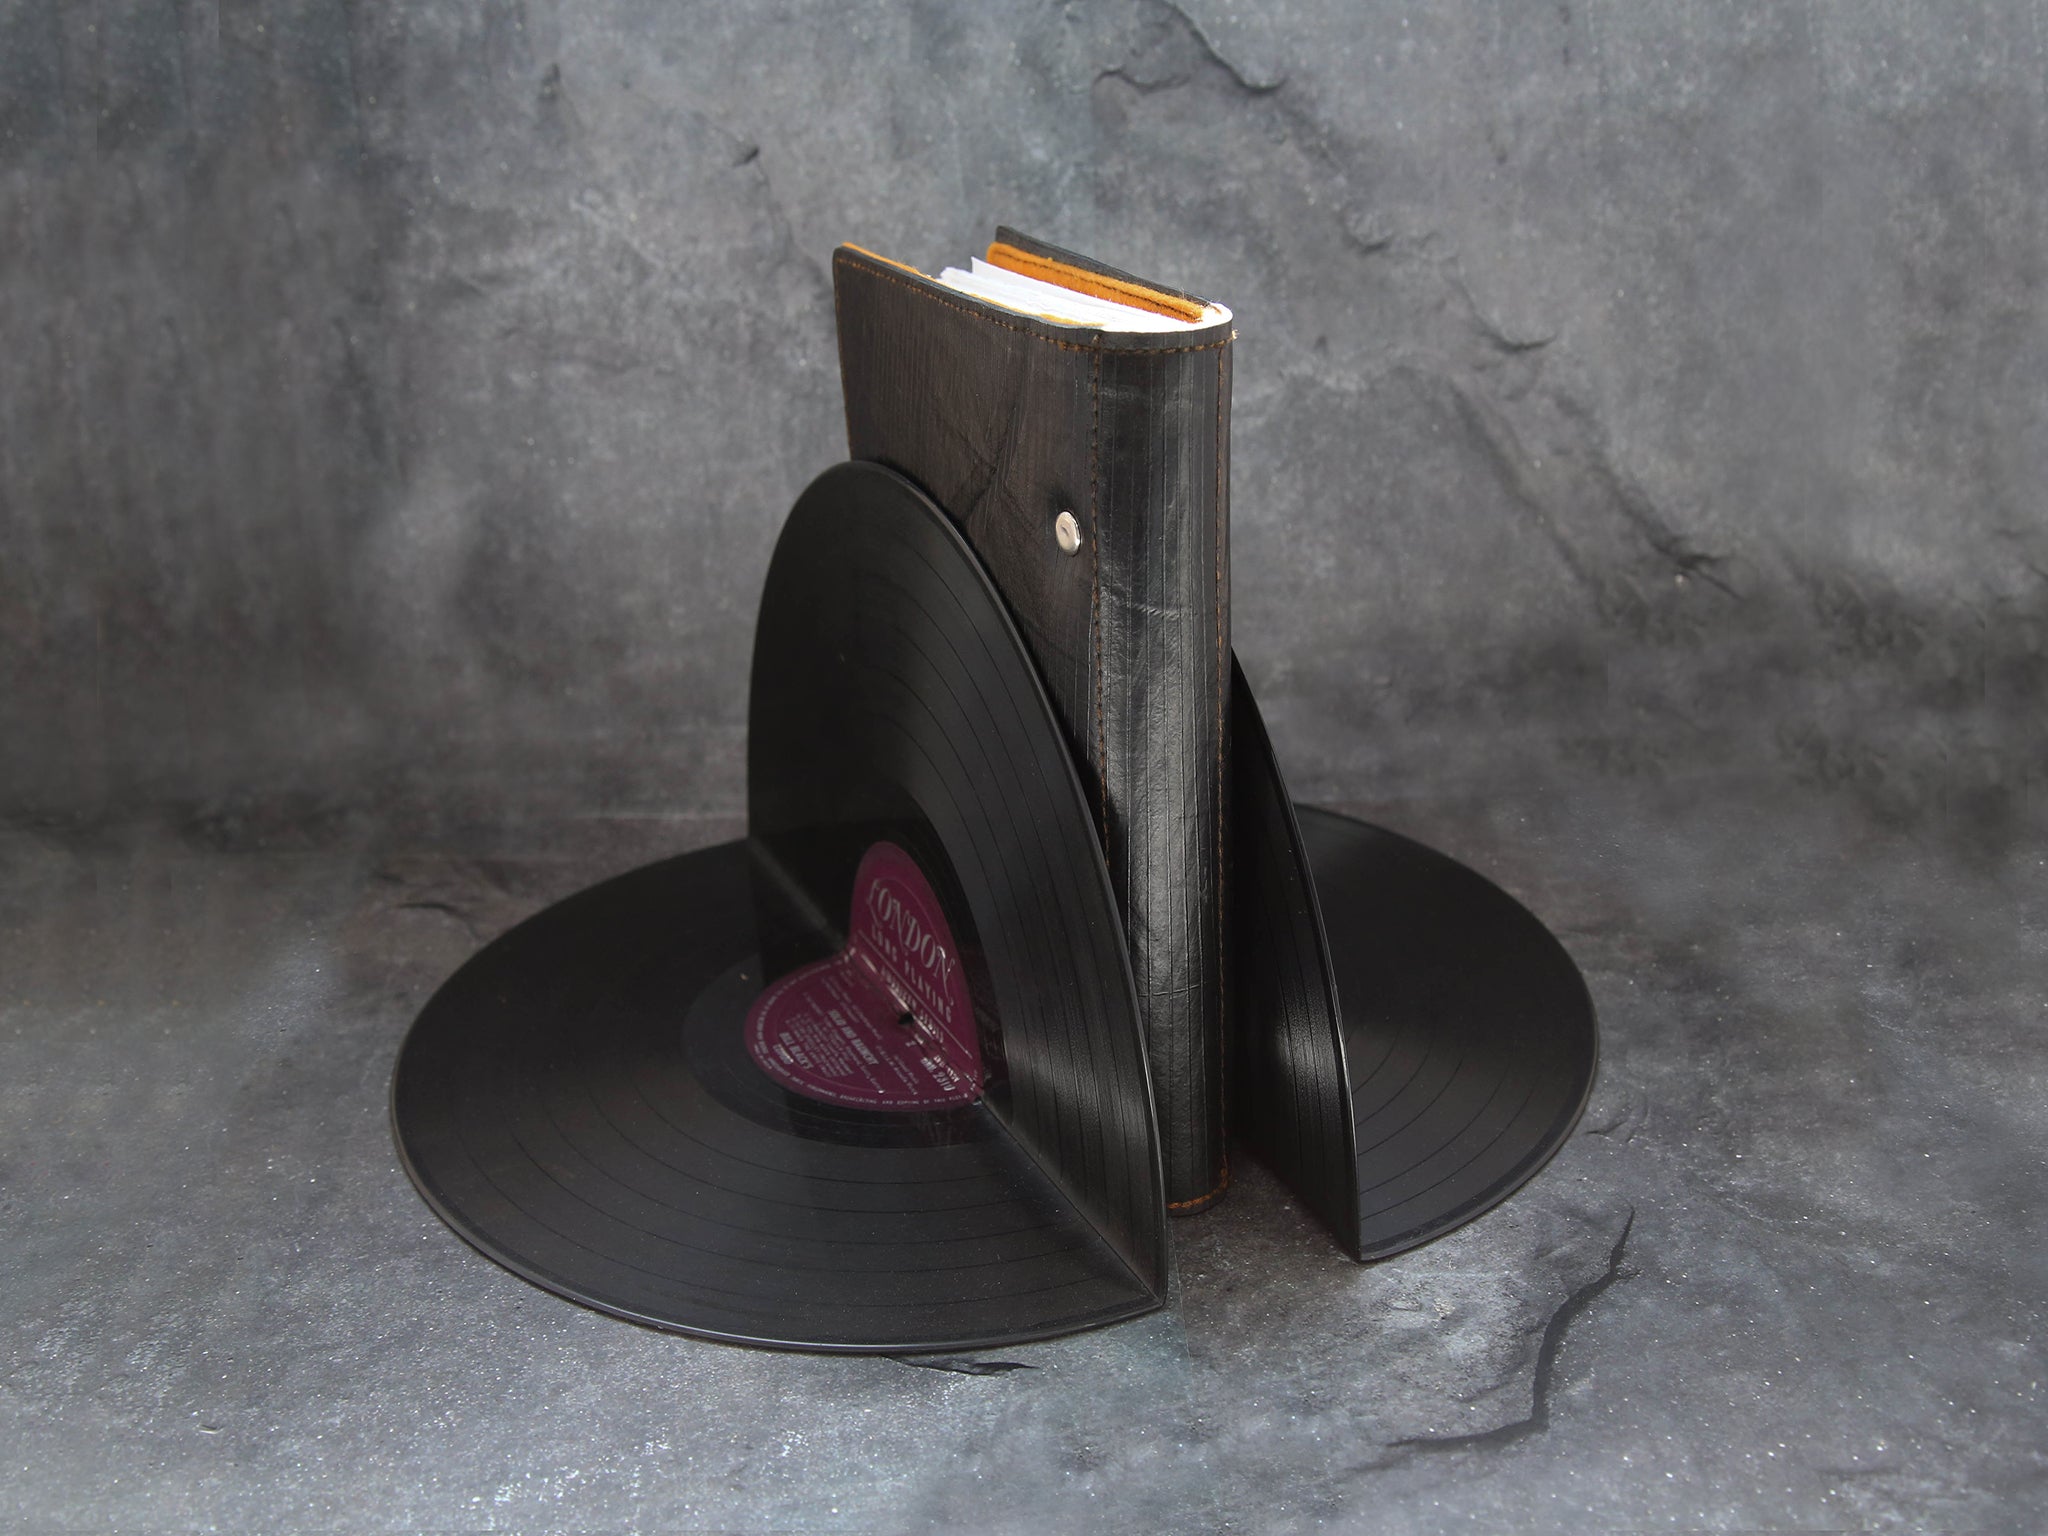 Upcycled Vinyl Record Book Ends